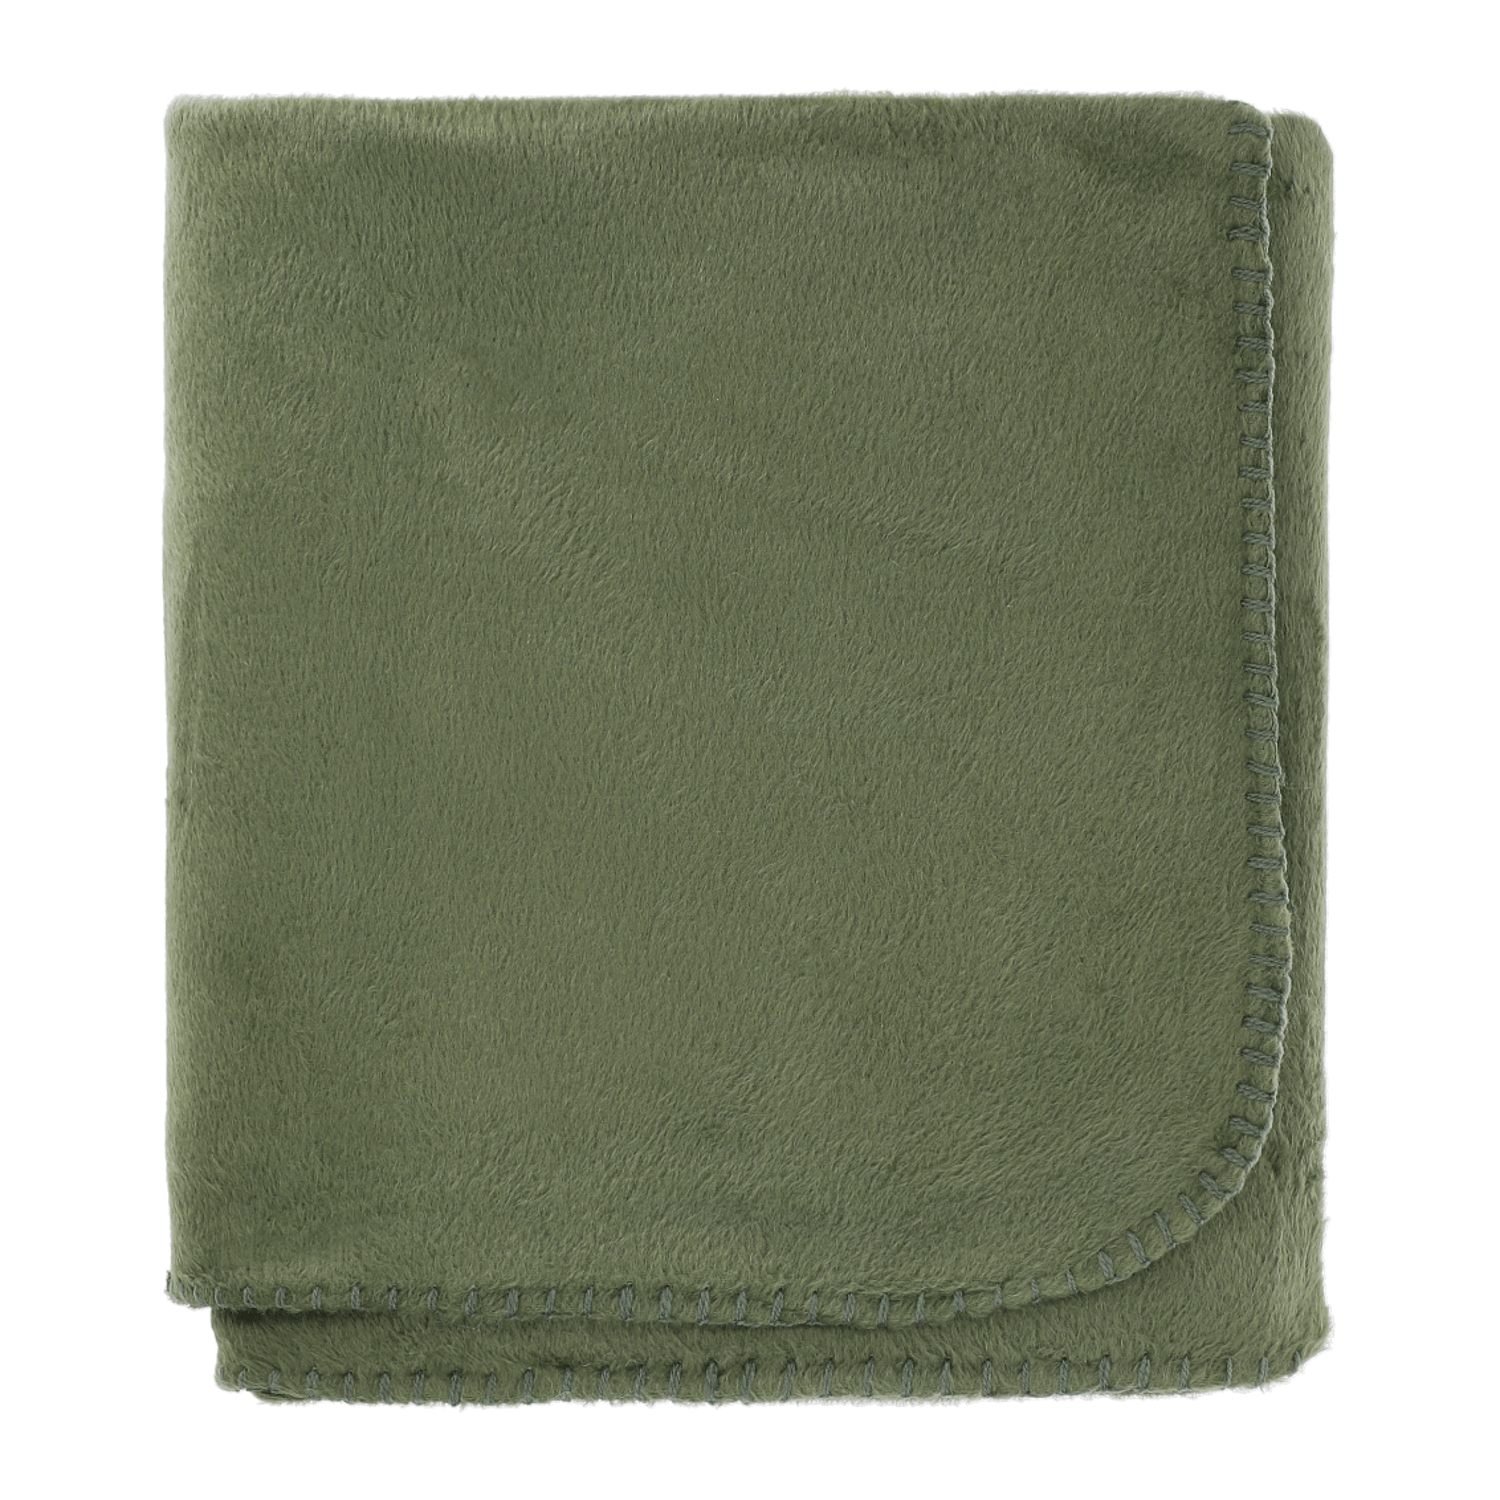 Threadfellows Accessories One Size / Green 100% Recycled PET Fleece Blanket with Canvas Pouch